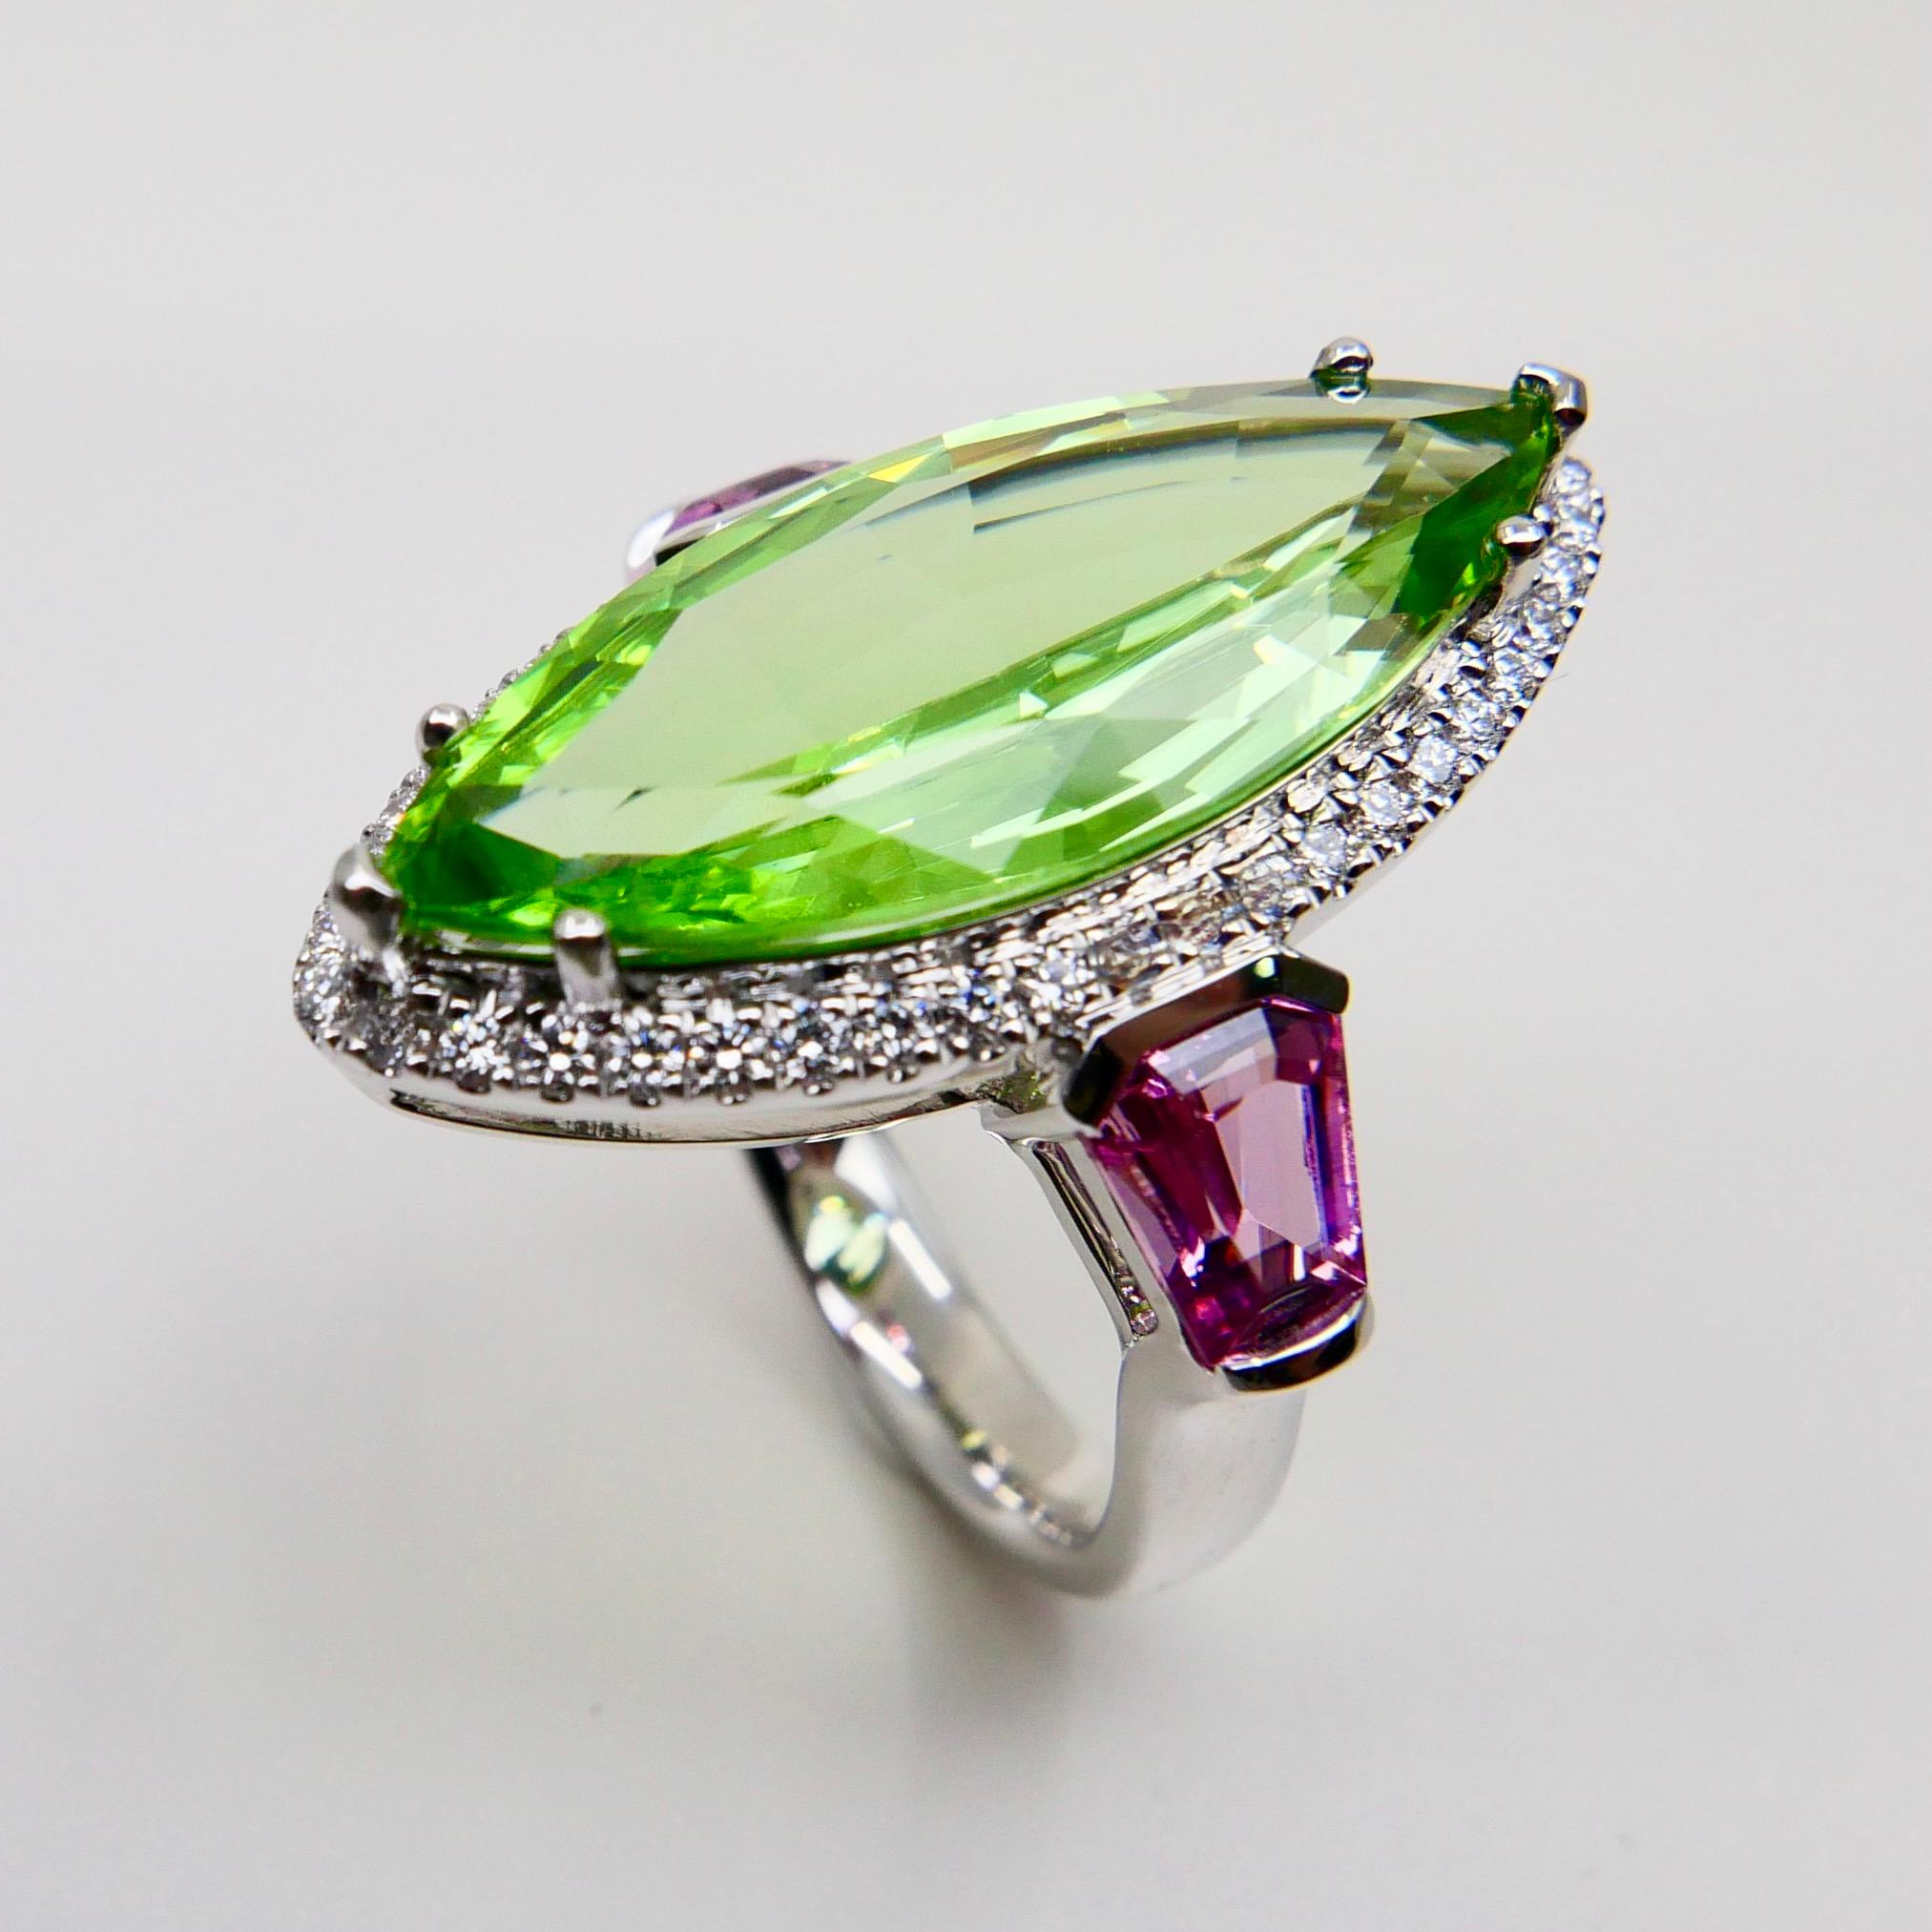 Women's Natural Peridot 7.38 Cts, Pink Spinel & Diamond Cocktail Ring, Statement Piece